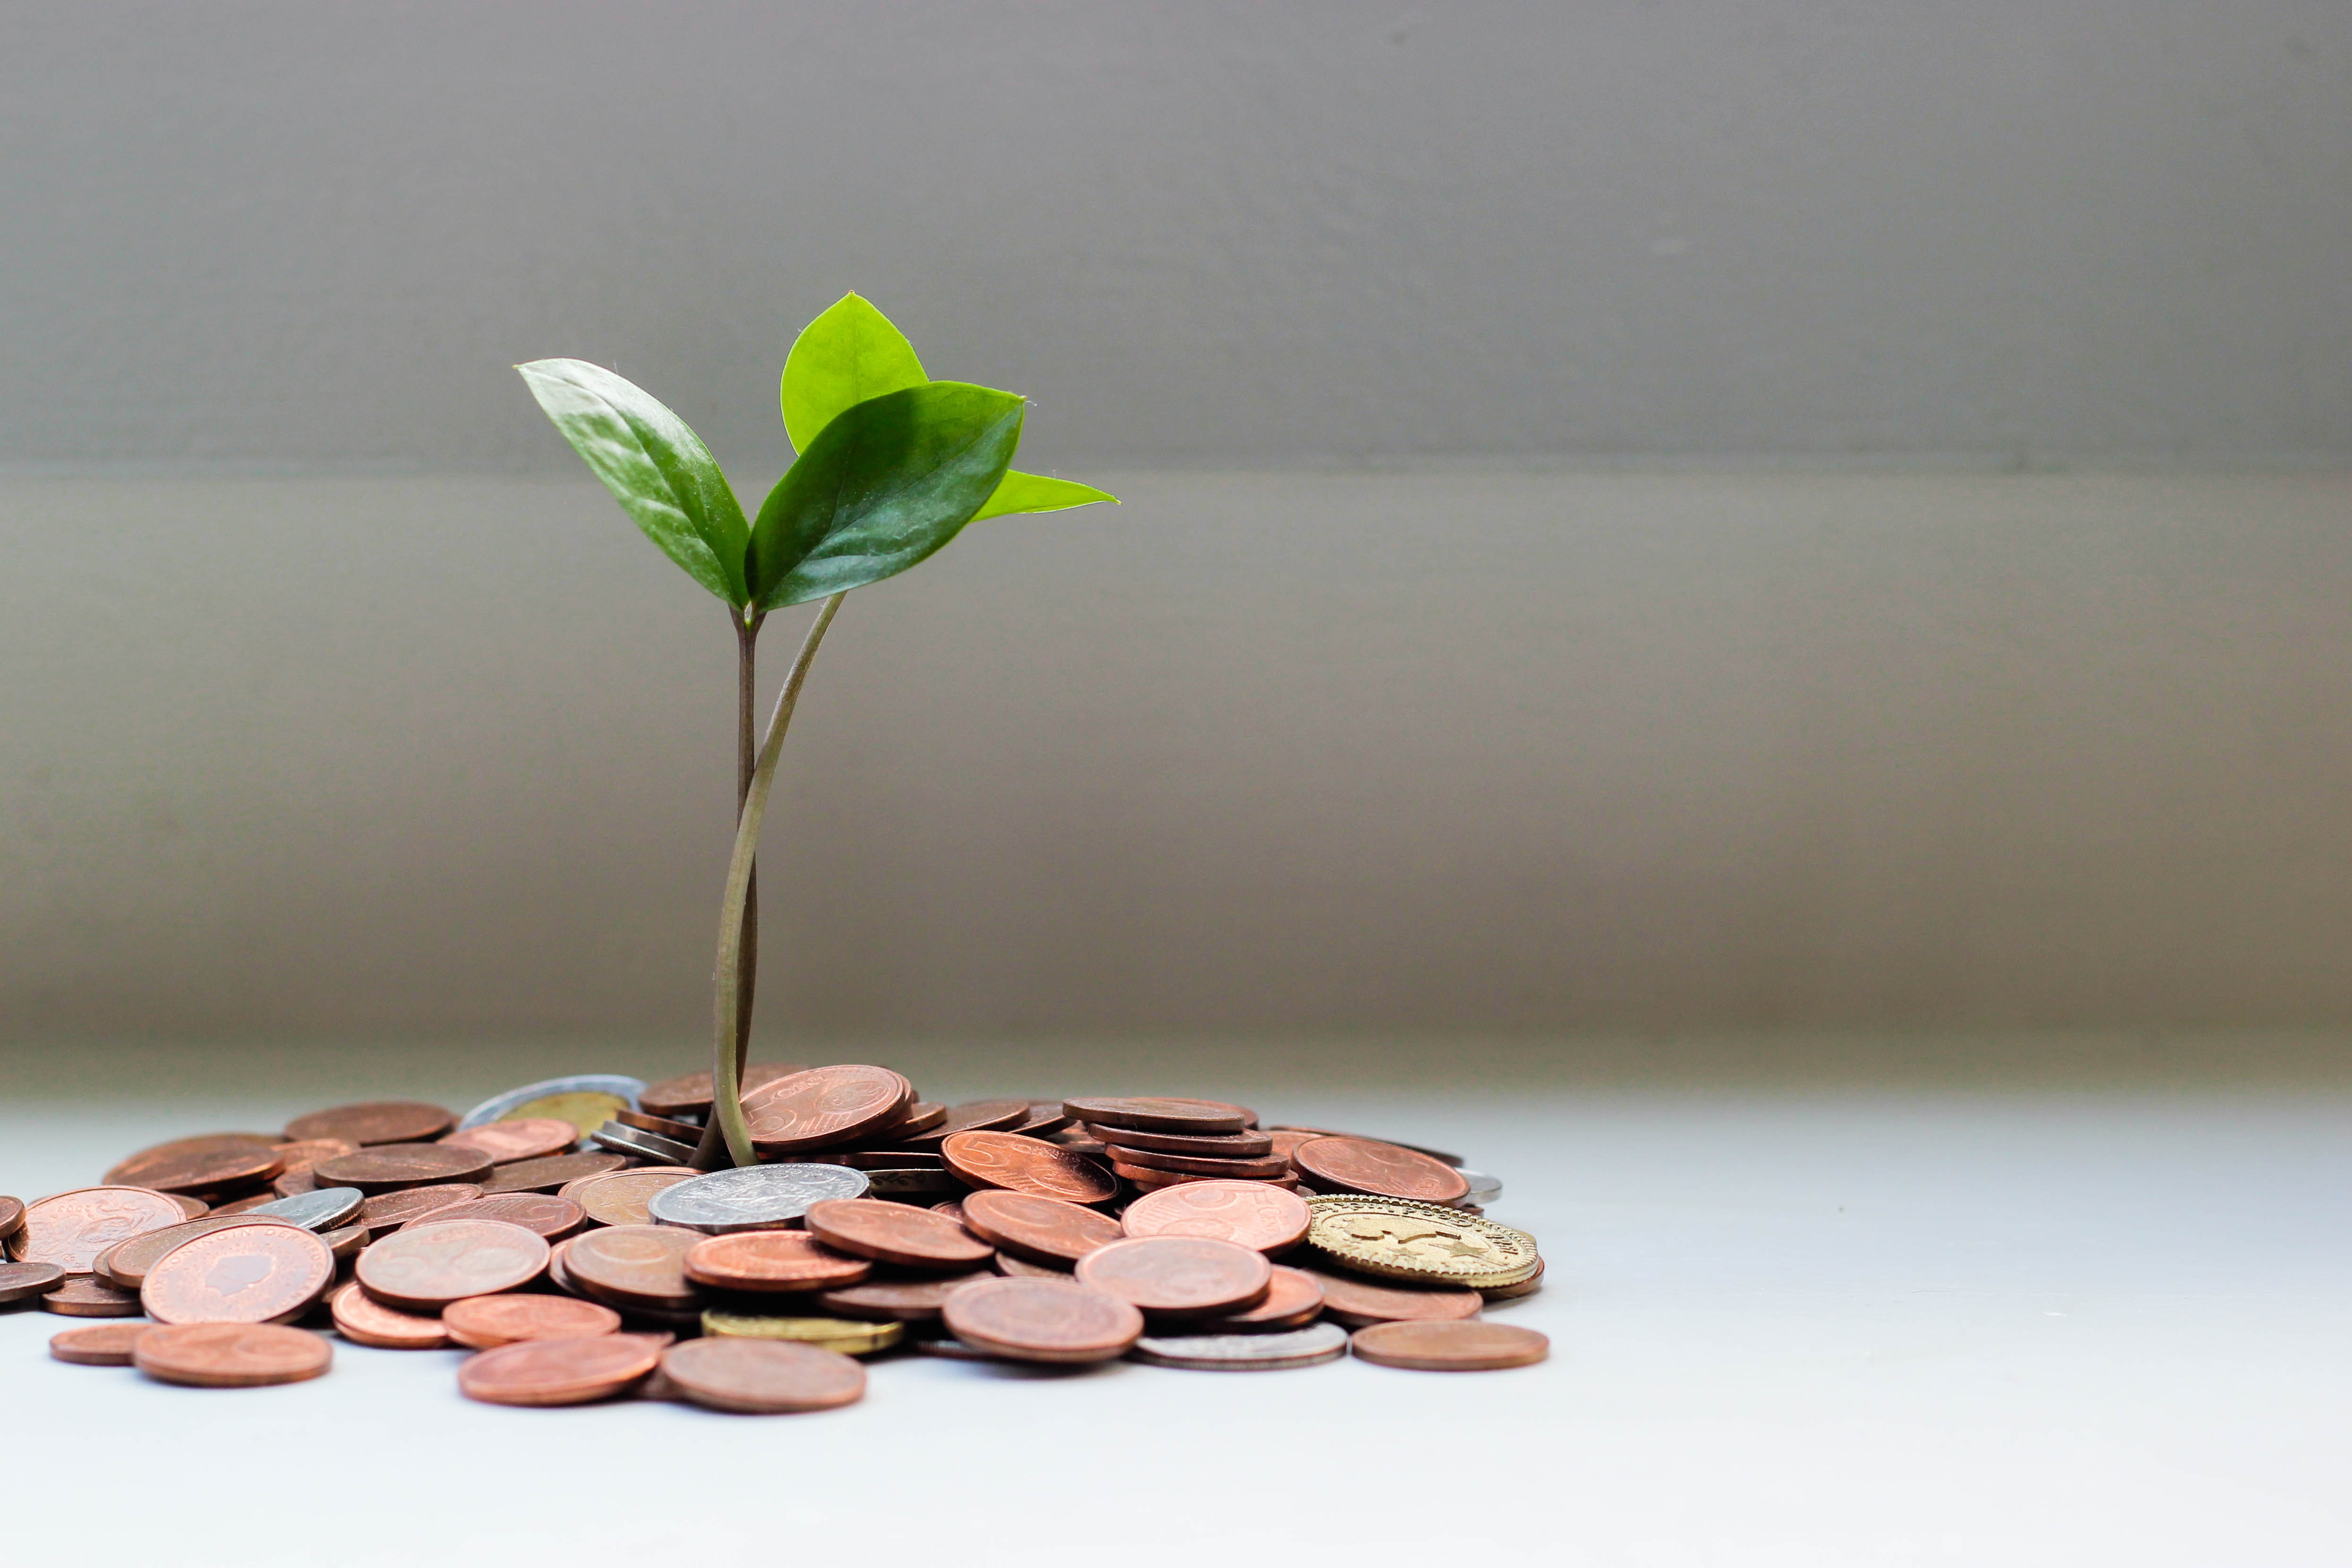 A plant sprouting out of coins representing growth.